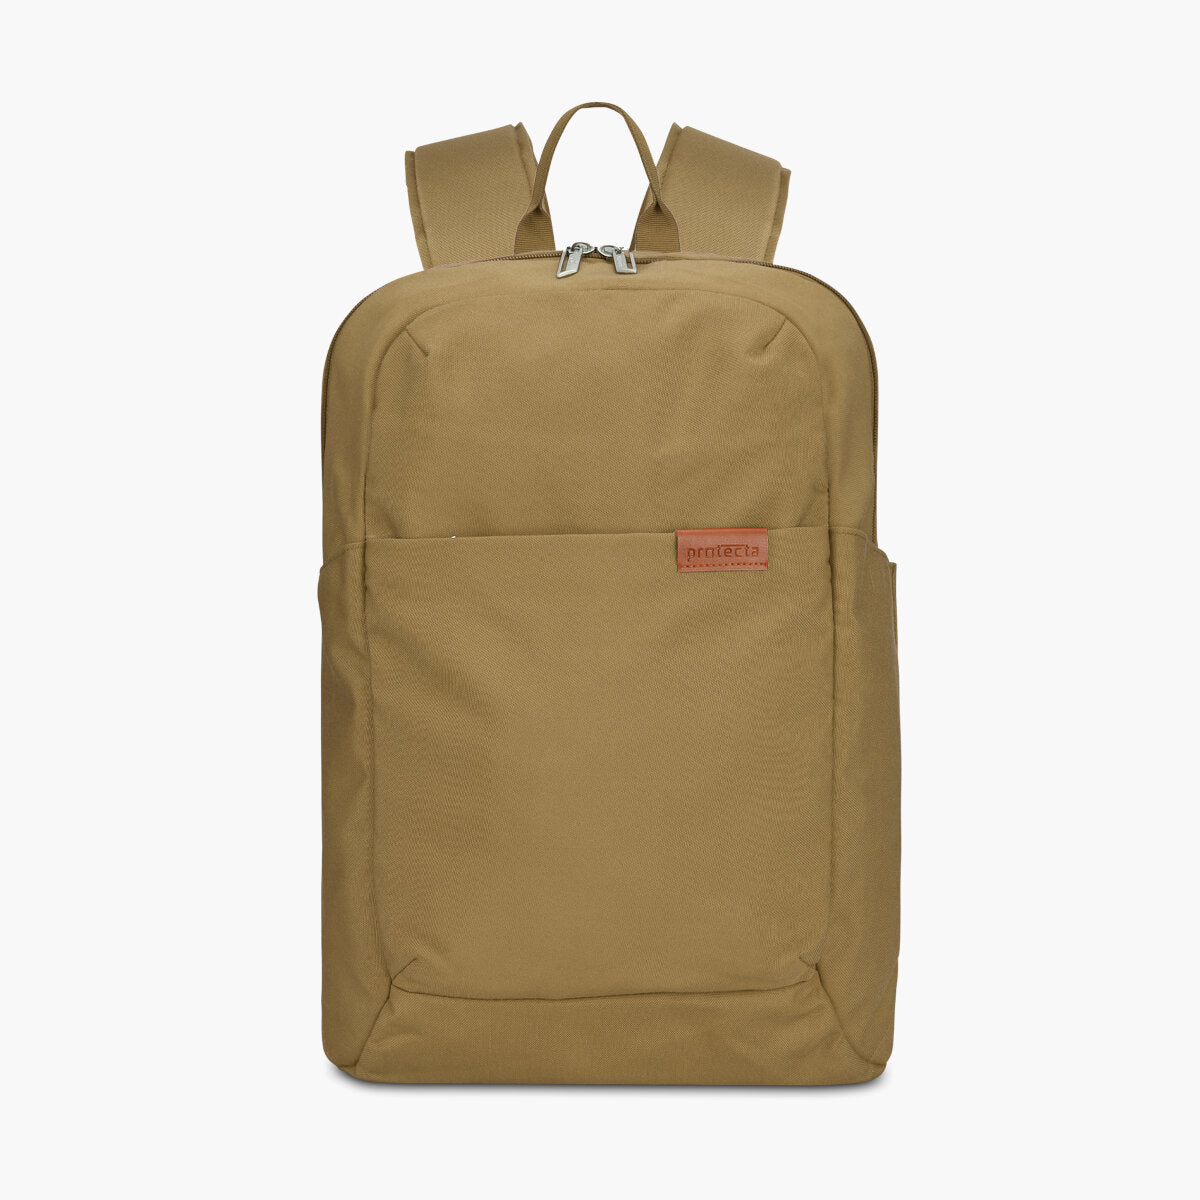 Beige | Protecta Strong Buzz Laptop Backpack - Main